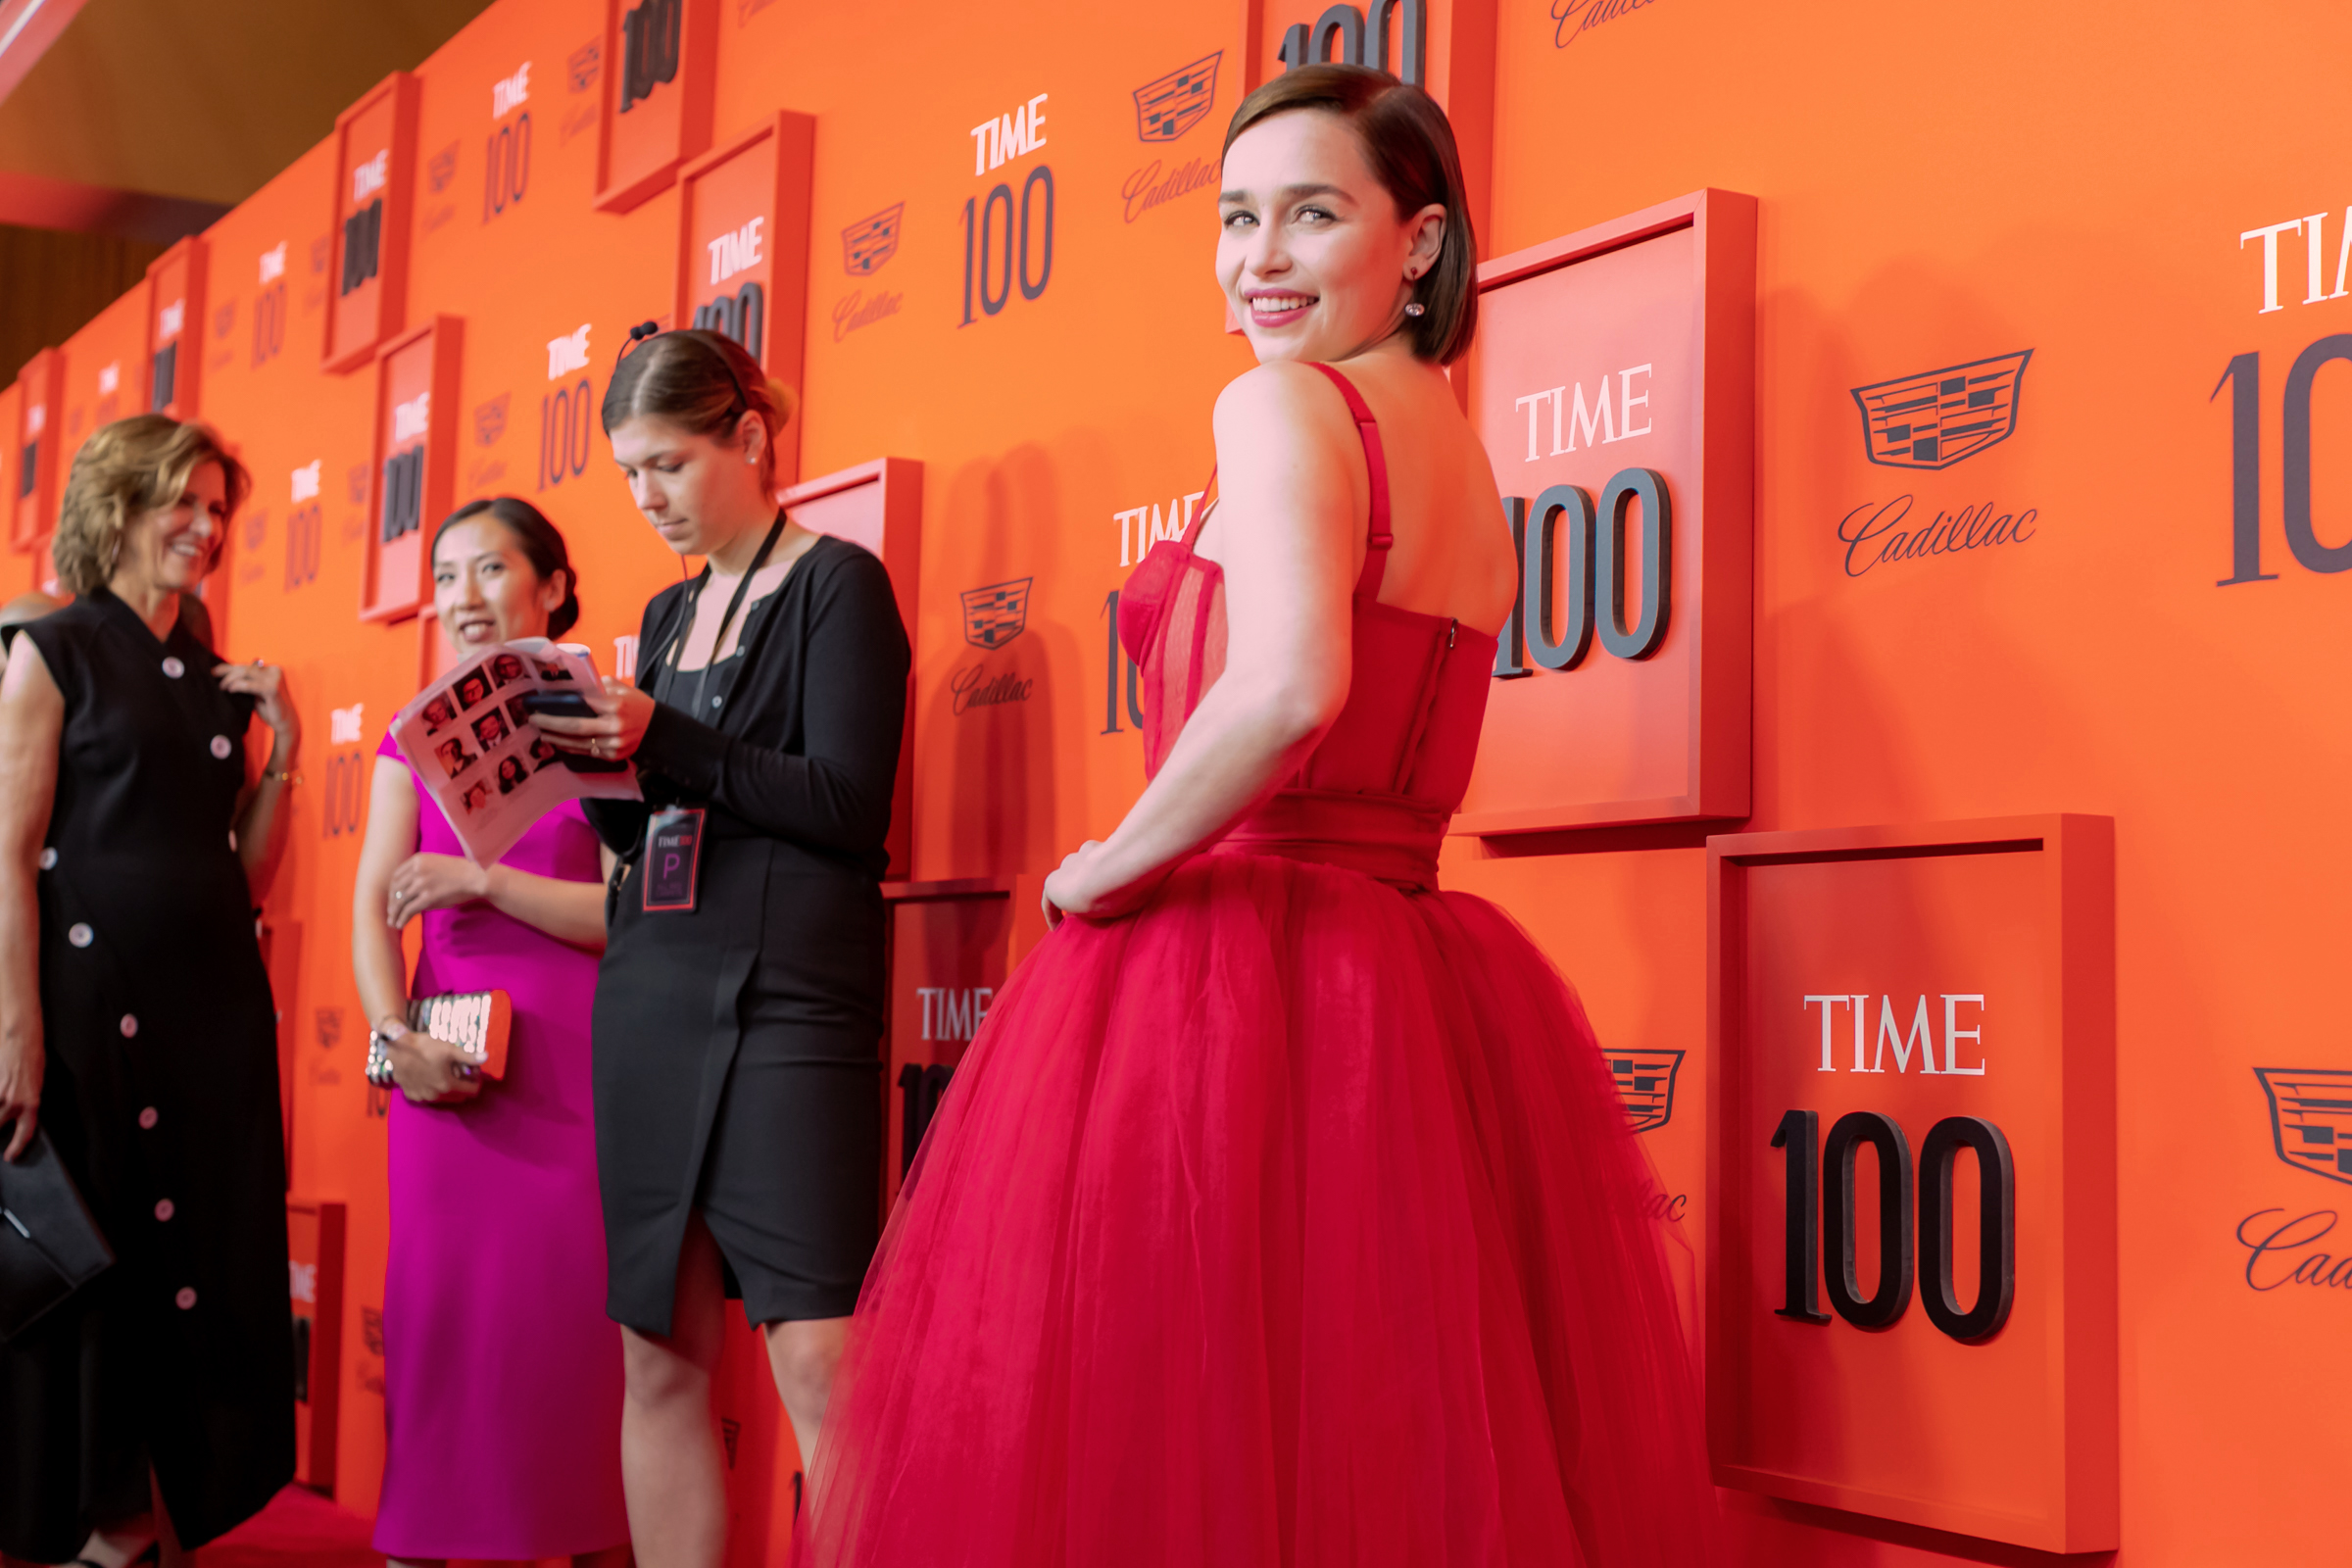 Emilia Clarke at the Time 100 Gala at Jazz at Lincoln Center in New York City on April 23, 2019. (Kevin Tachman for TIME)